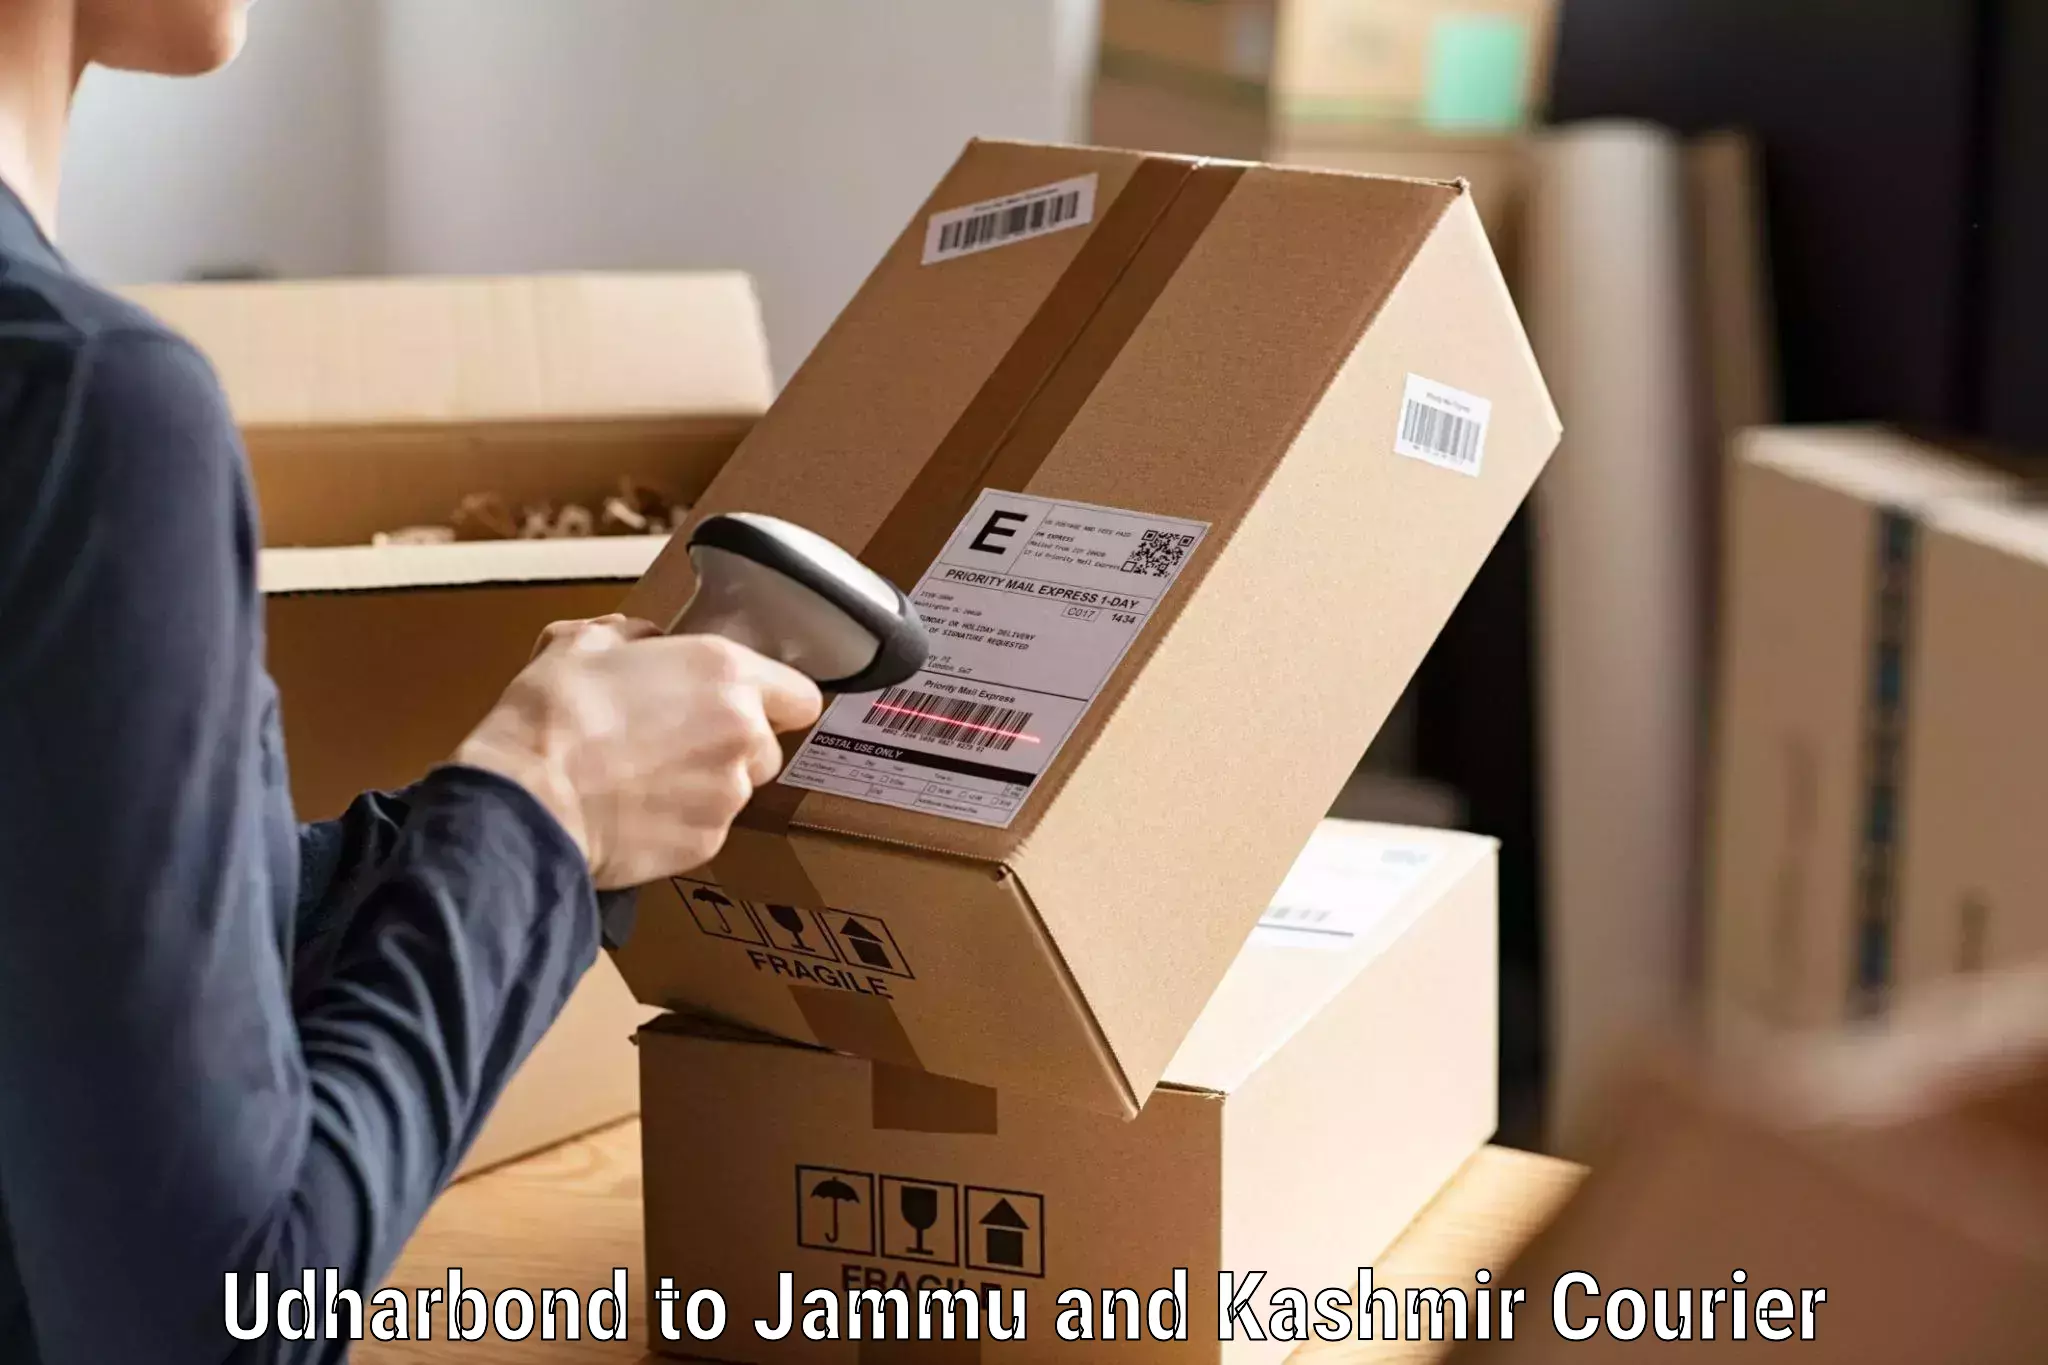 State-of-the-art courier technology Udharbond to Chenani